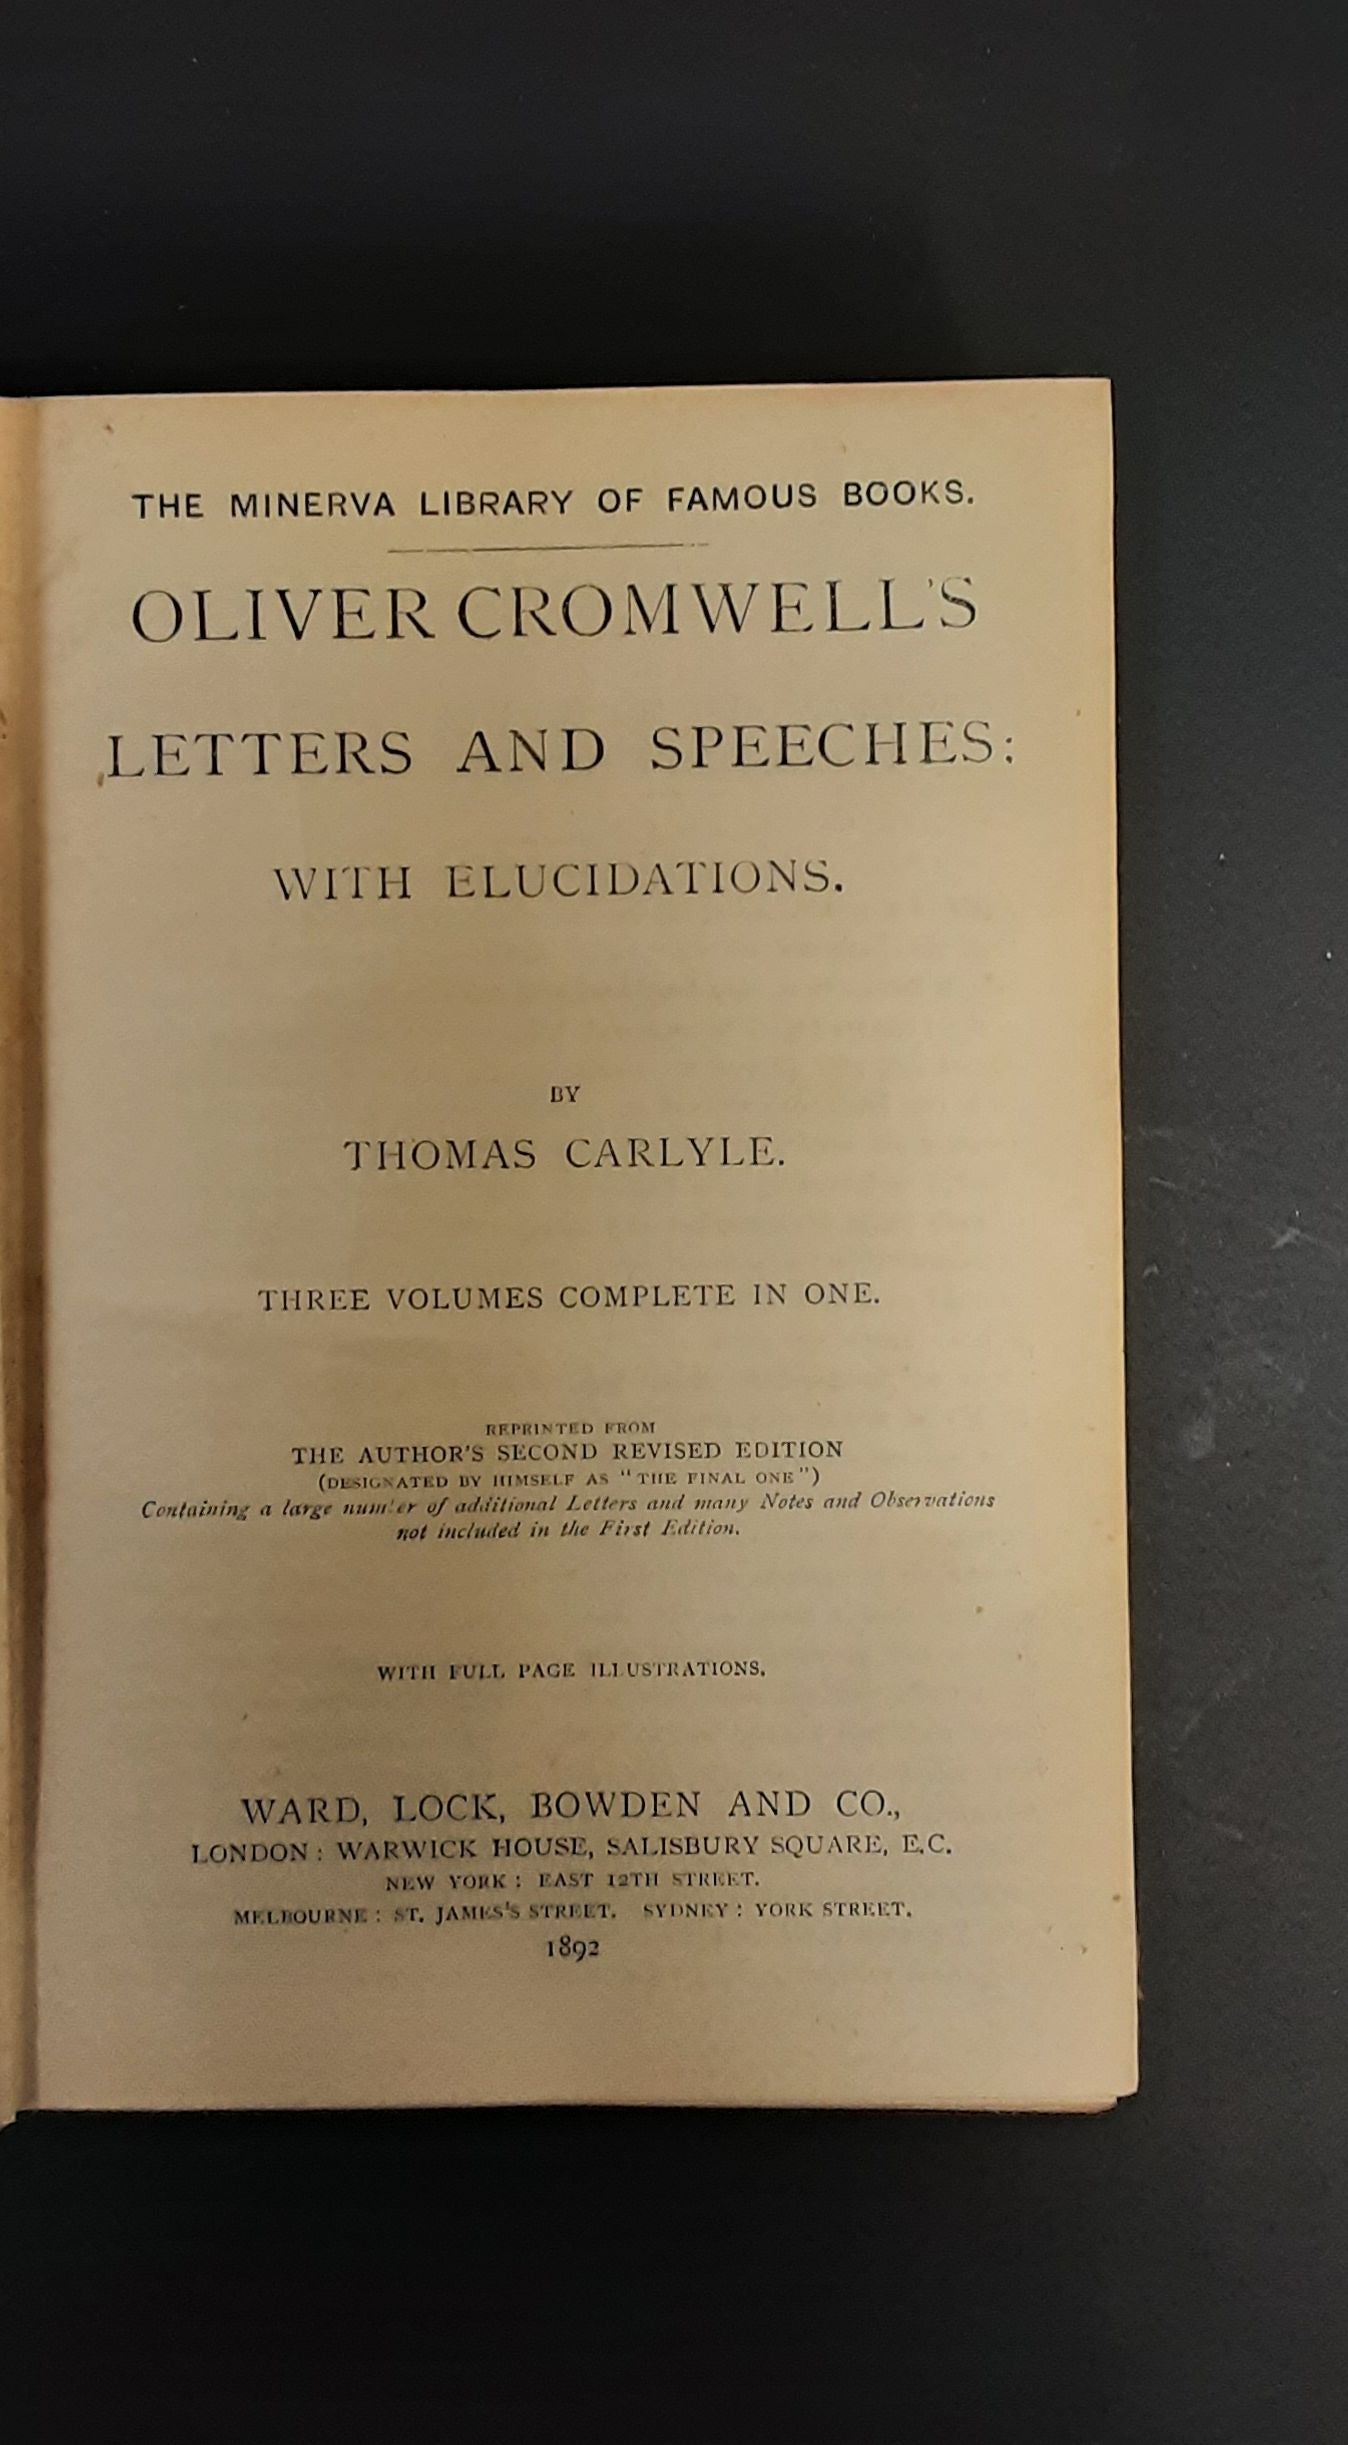 Cromwell's Letters and Speeches by Thomas Carlisle, Word, Lock, Bowden and co, 1892